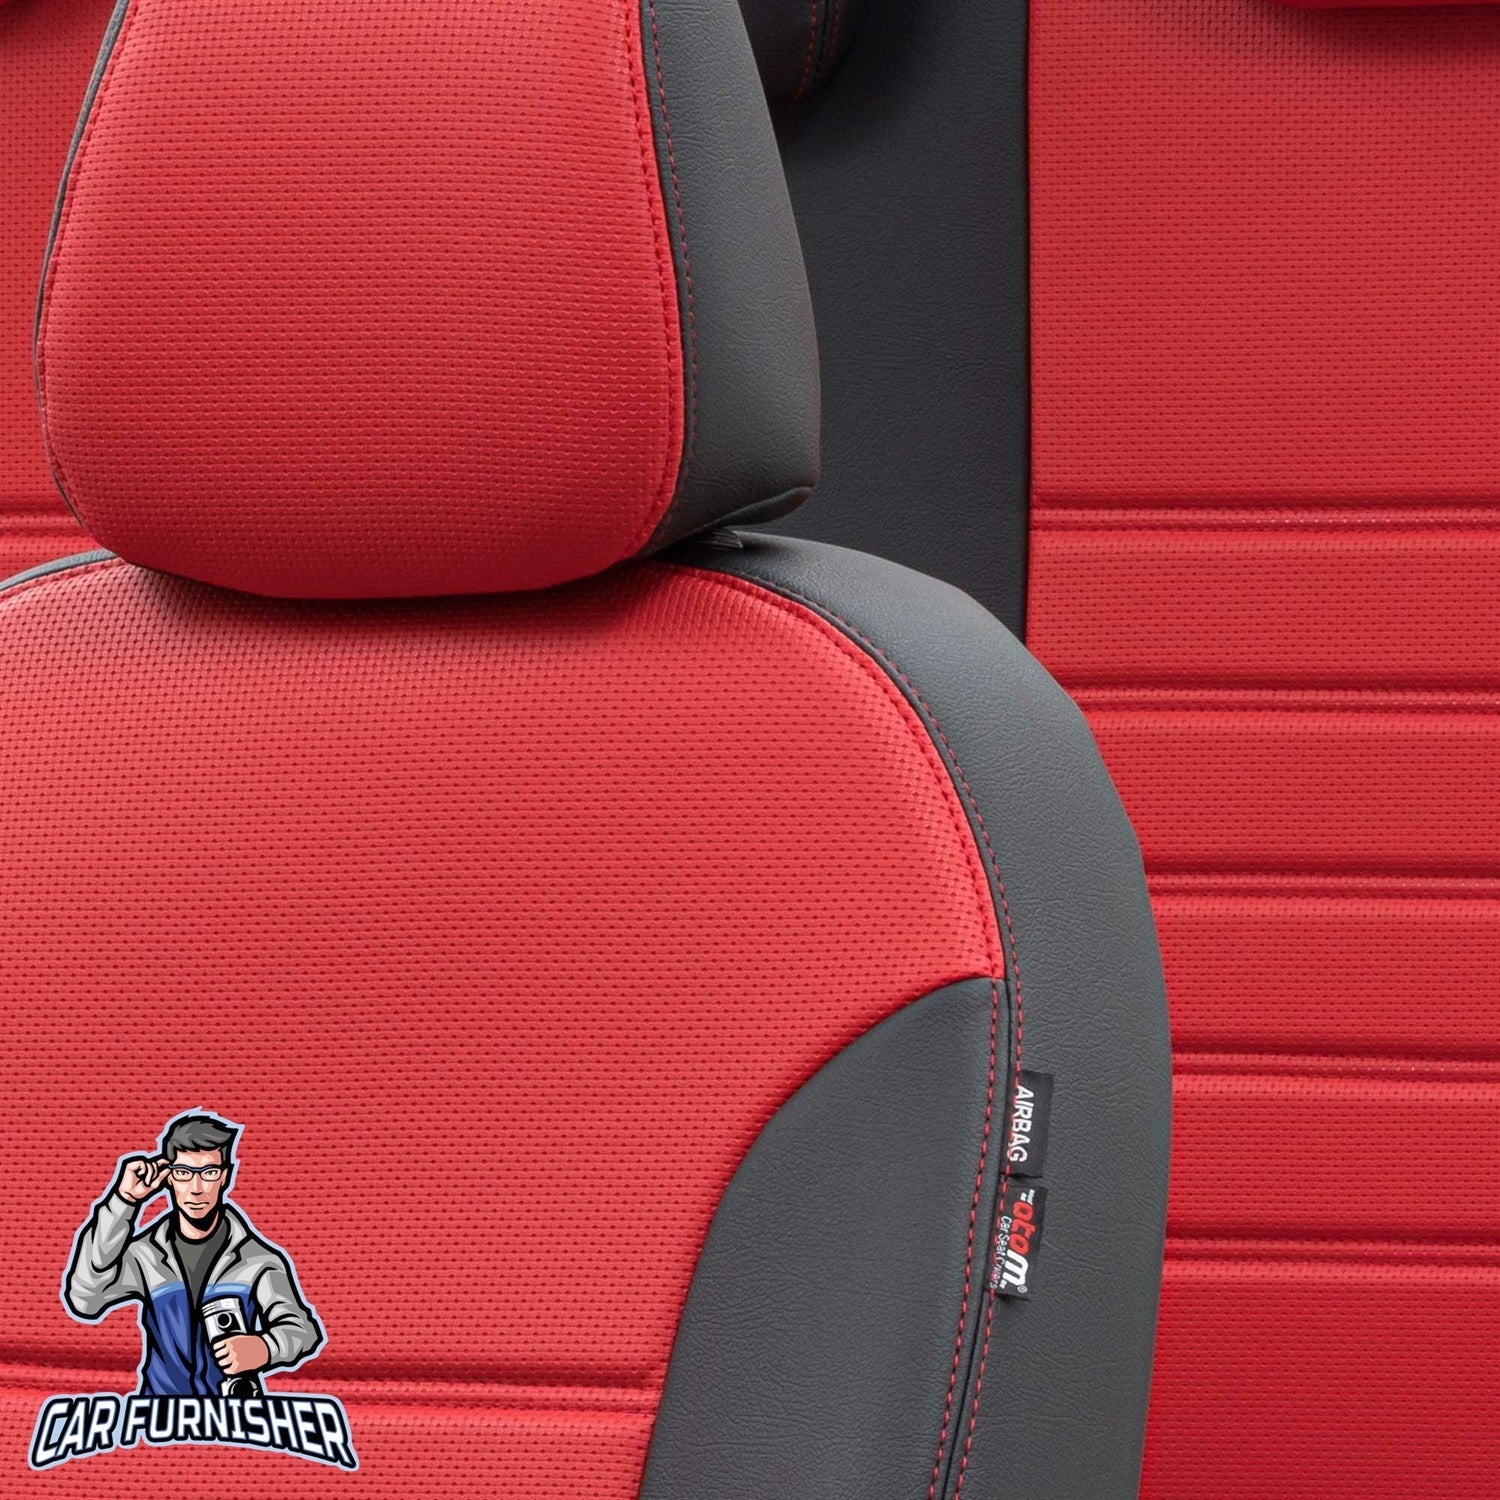 Mitsubishi L-300 Seat Covers New York Leather Design Red Leather